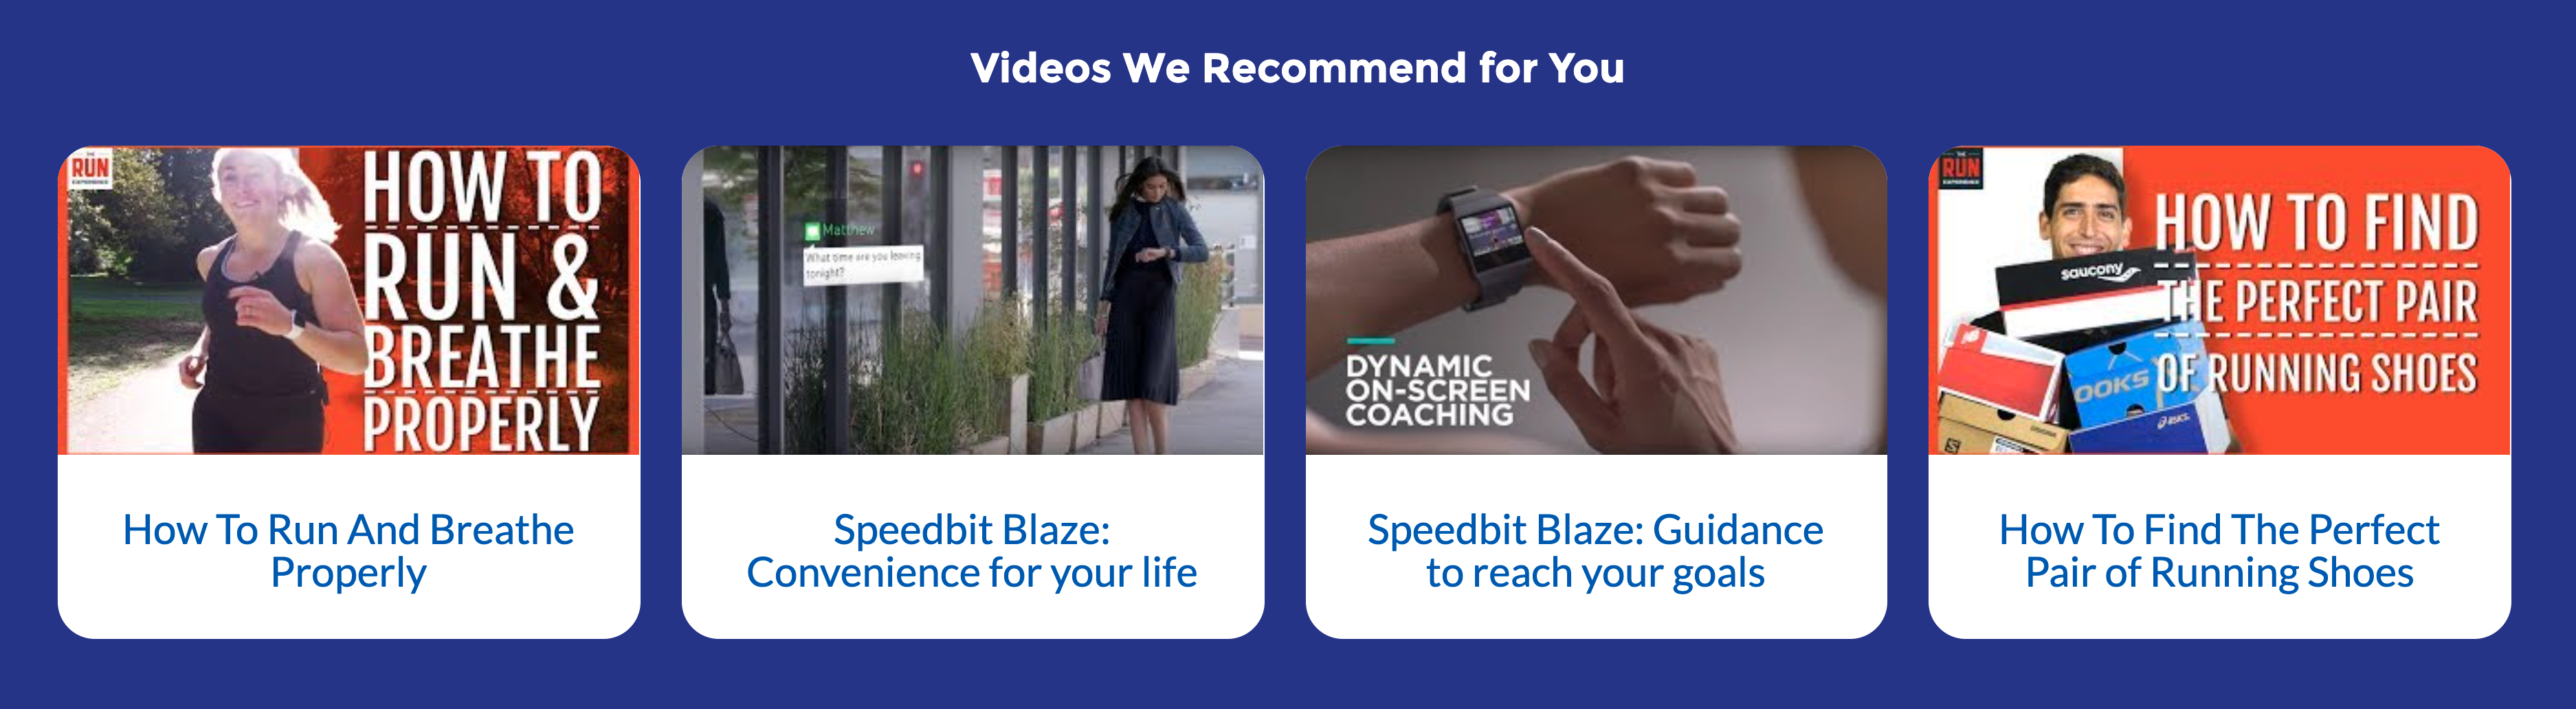 recommended videos carrousel